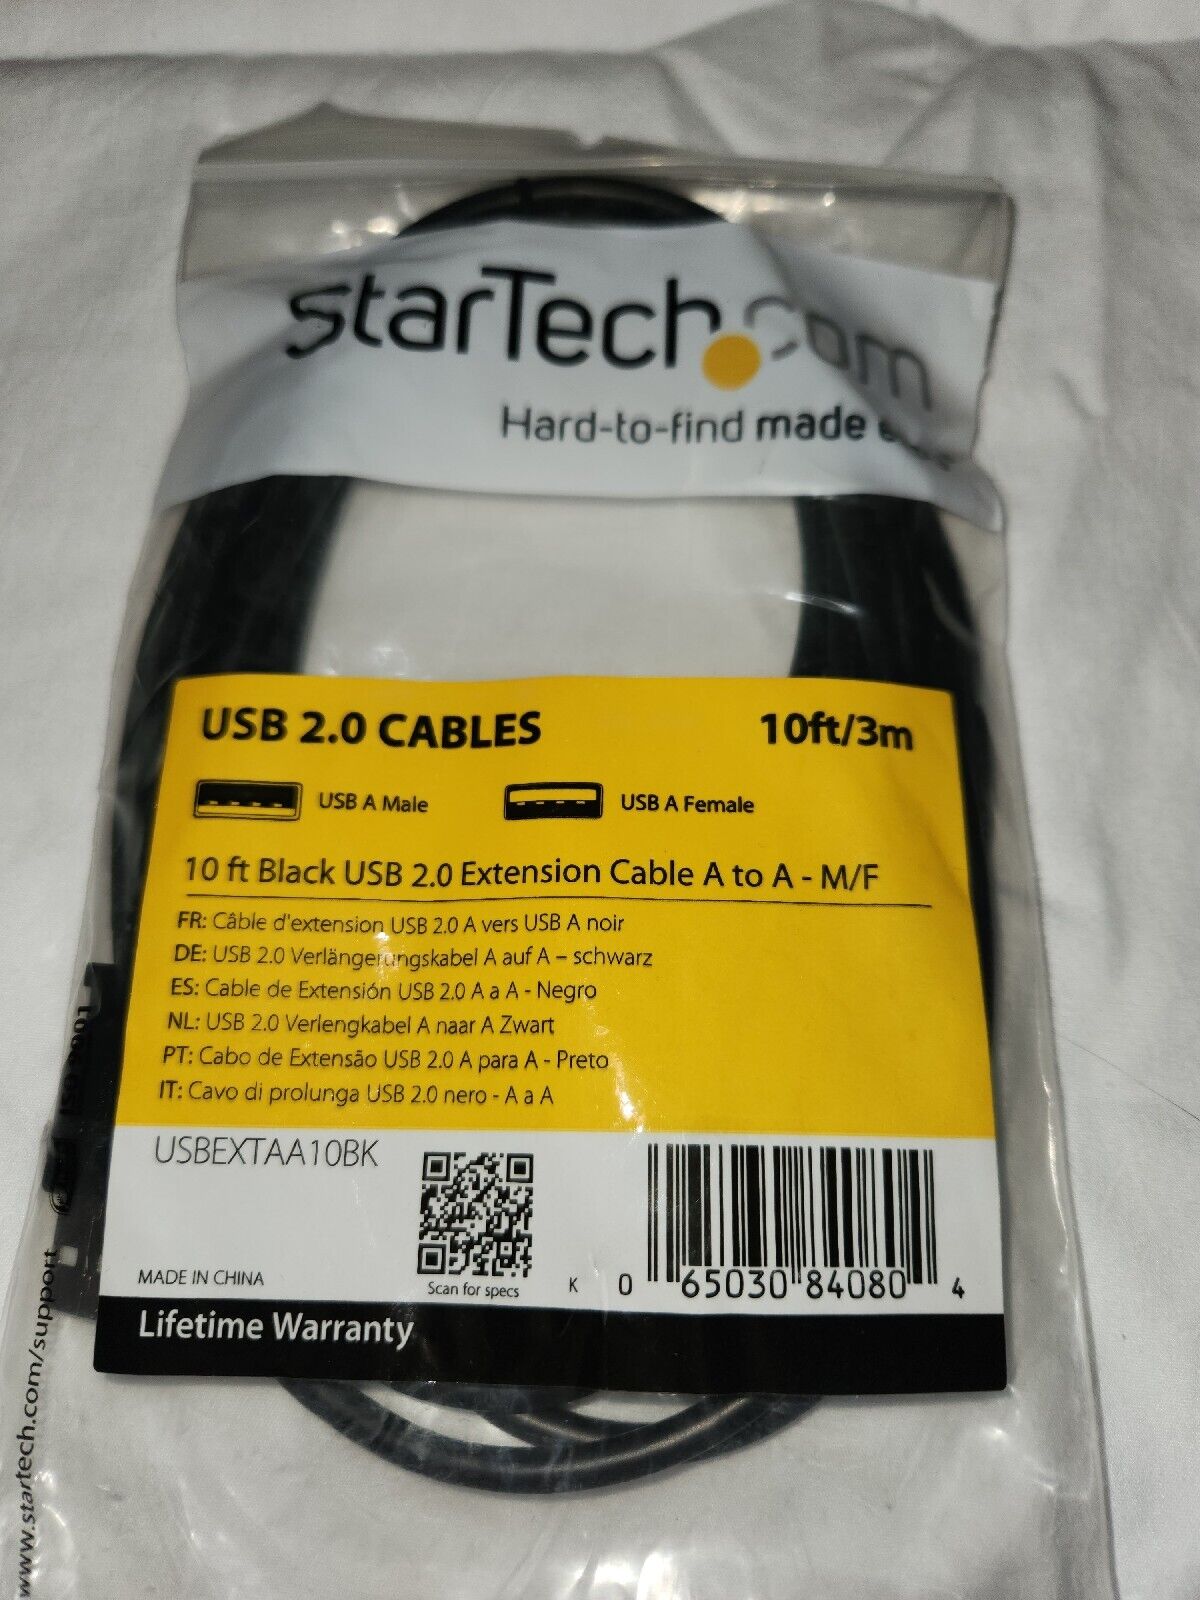 Star tech10 Ft Black Usb 2.0 Extension Cable A To A - M/F -  USB A Male